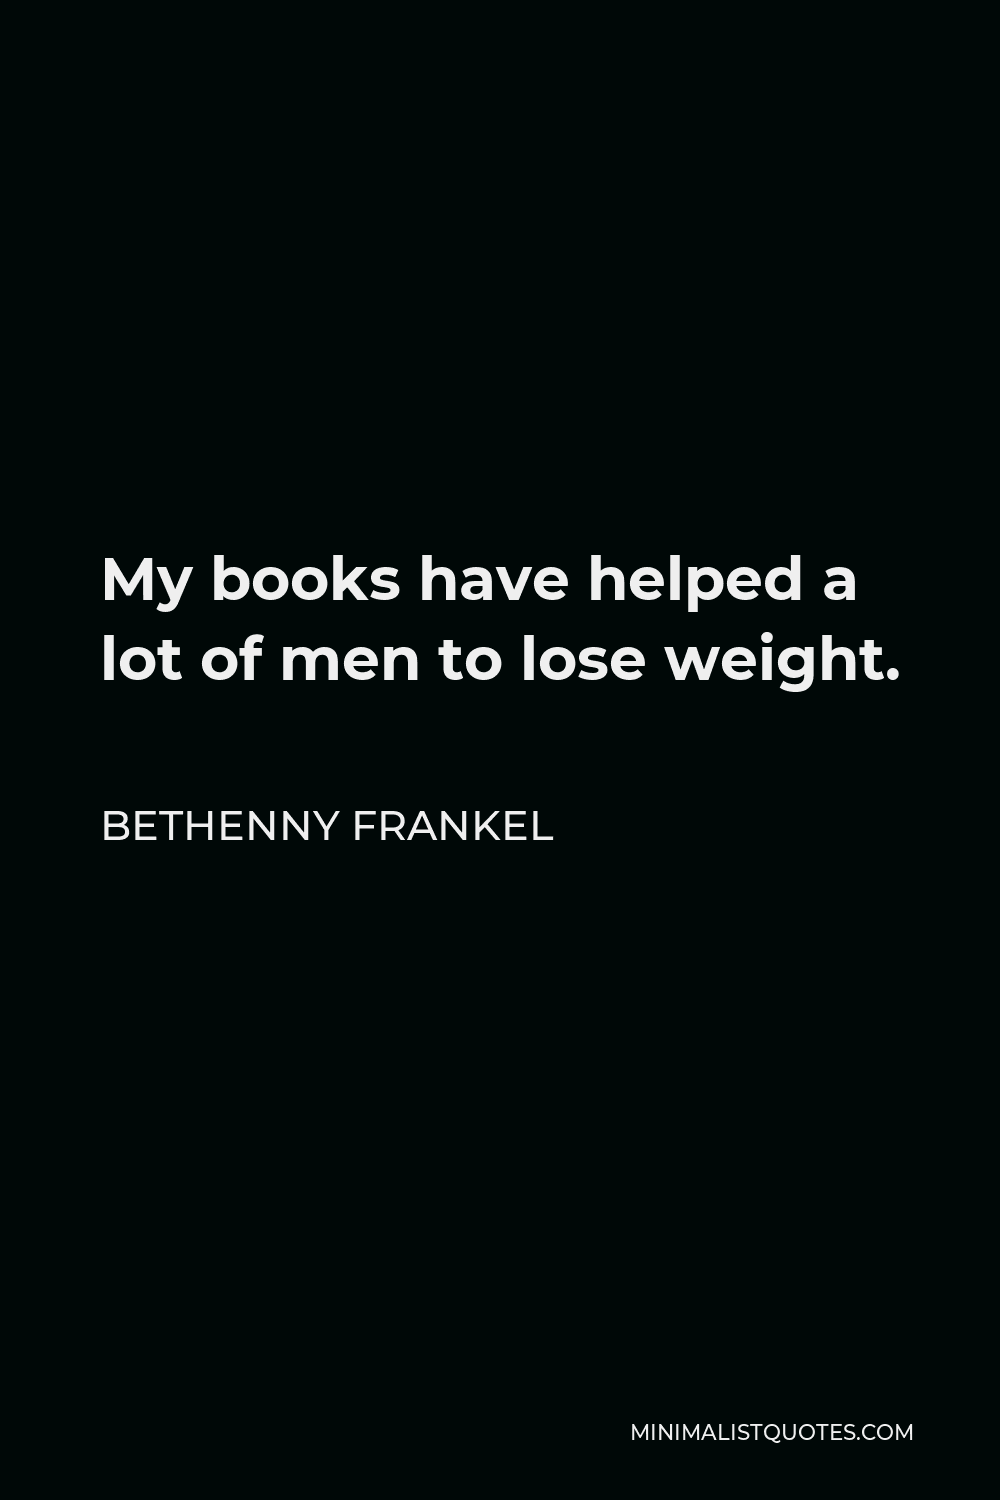 Bethenny Frankel Quote - My books have helped a lot of men to lose weight.